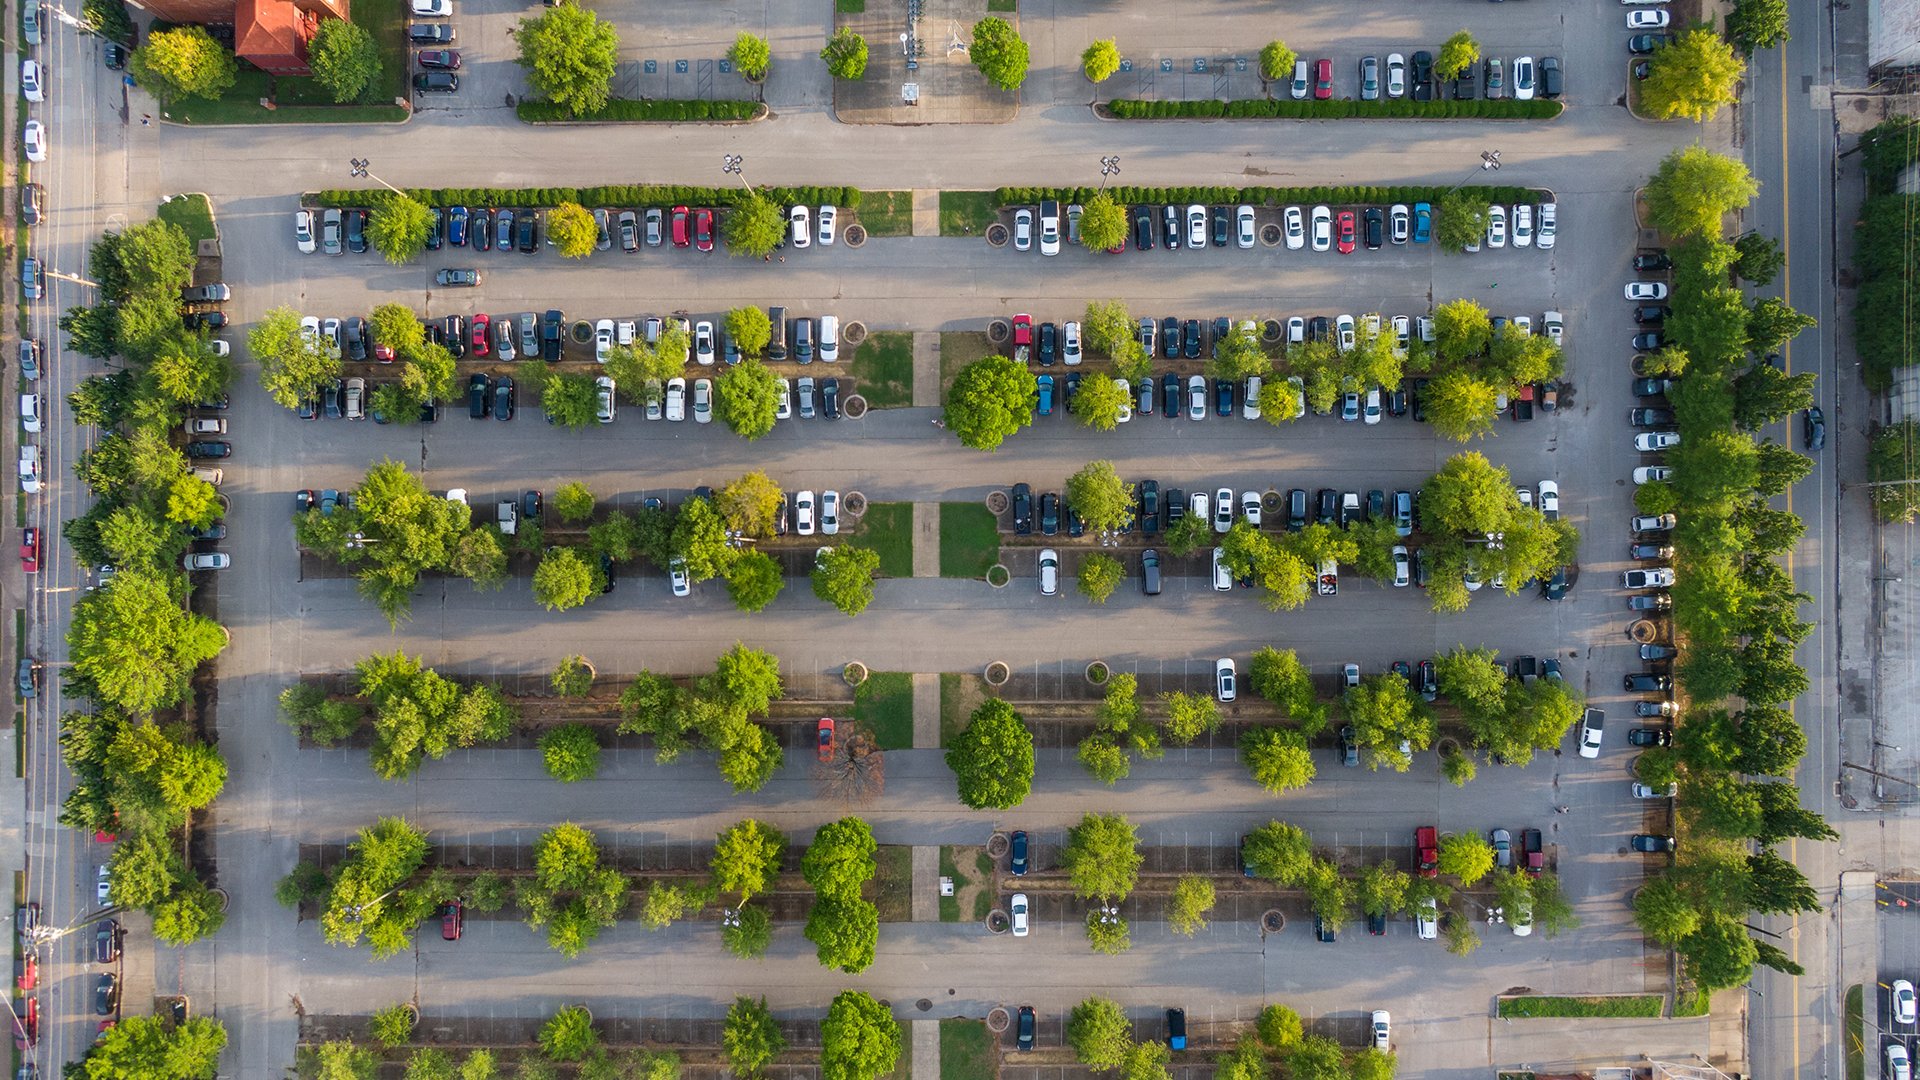 Parking lot from birds-eye view